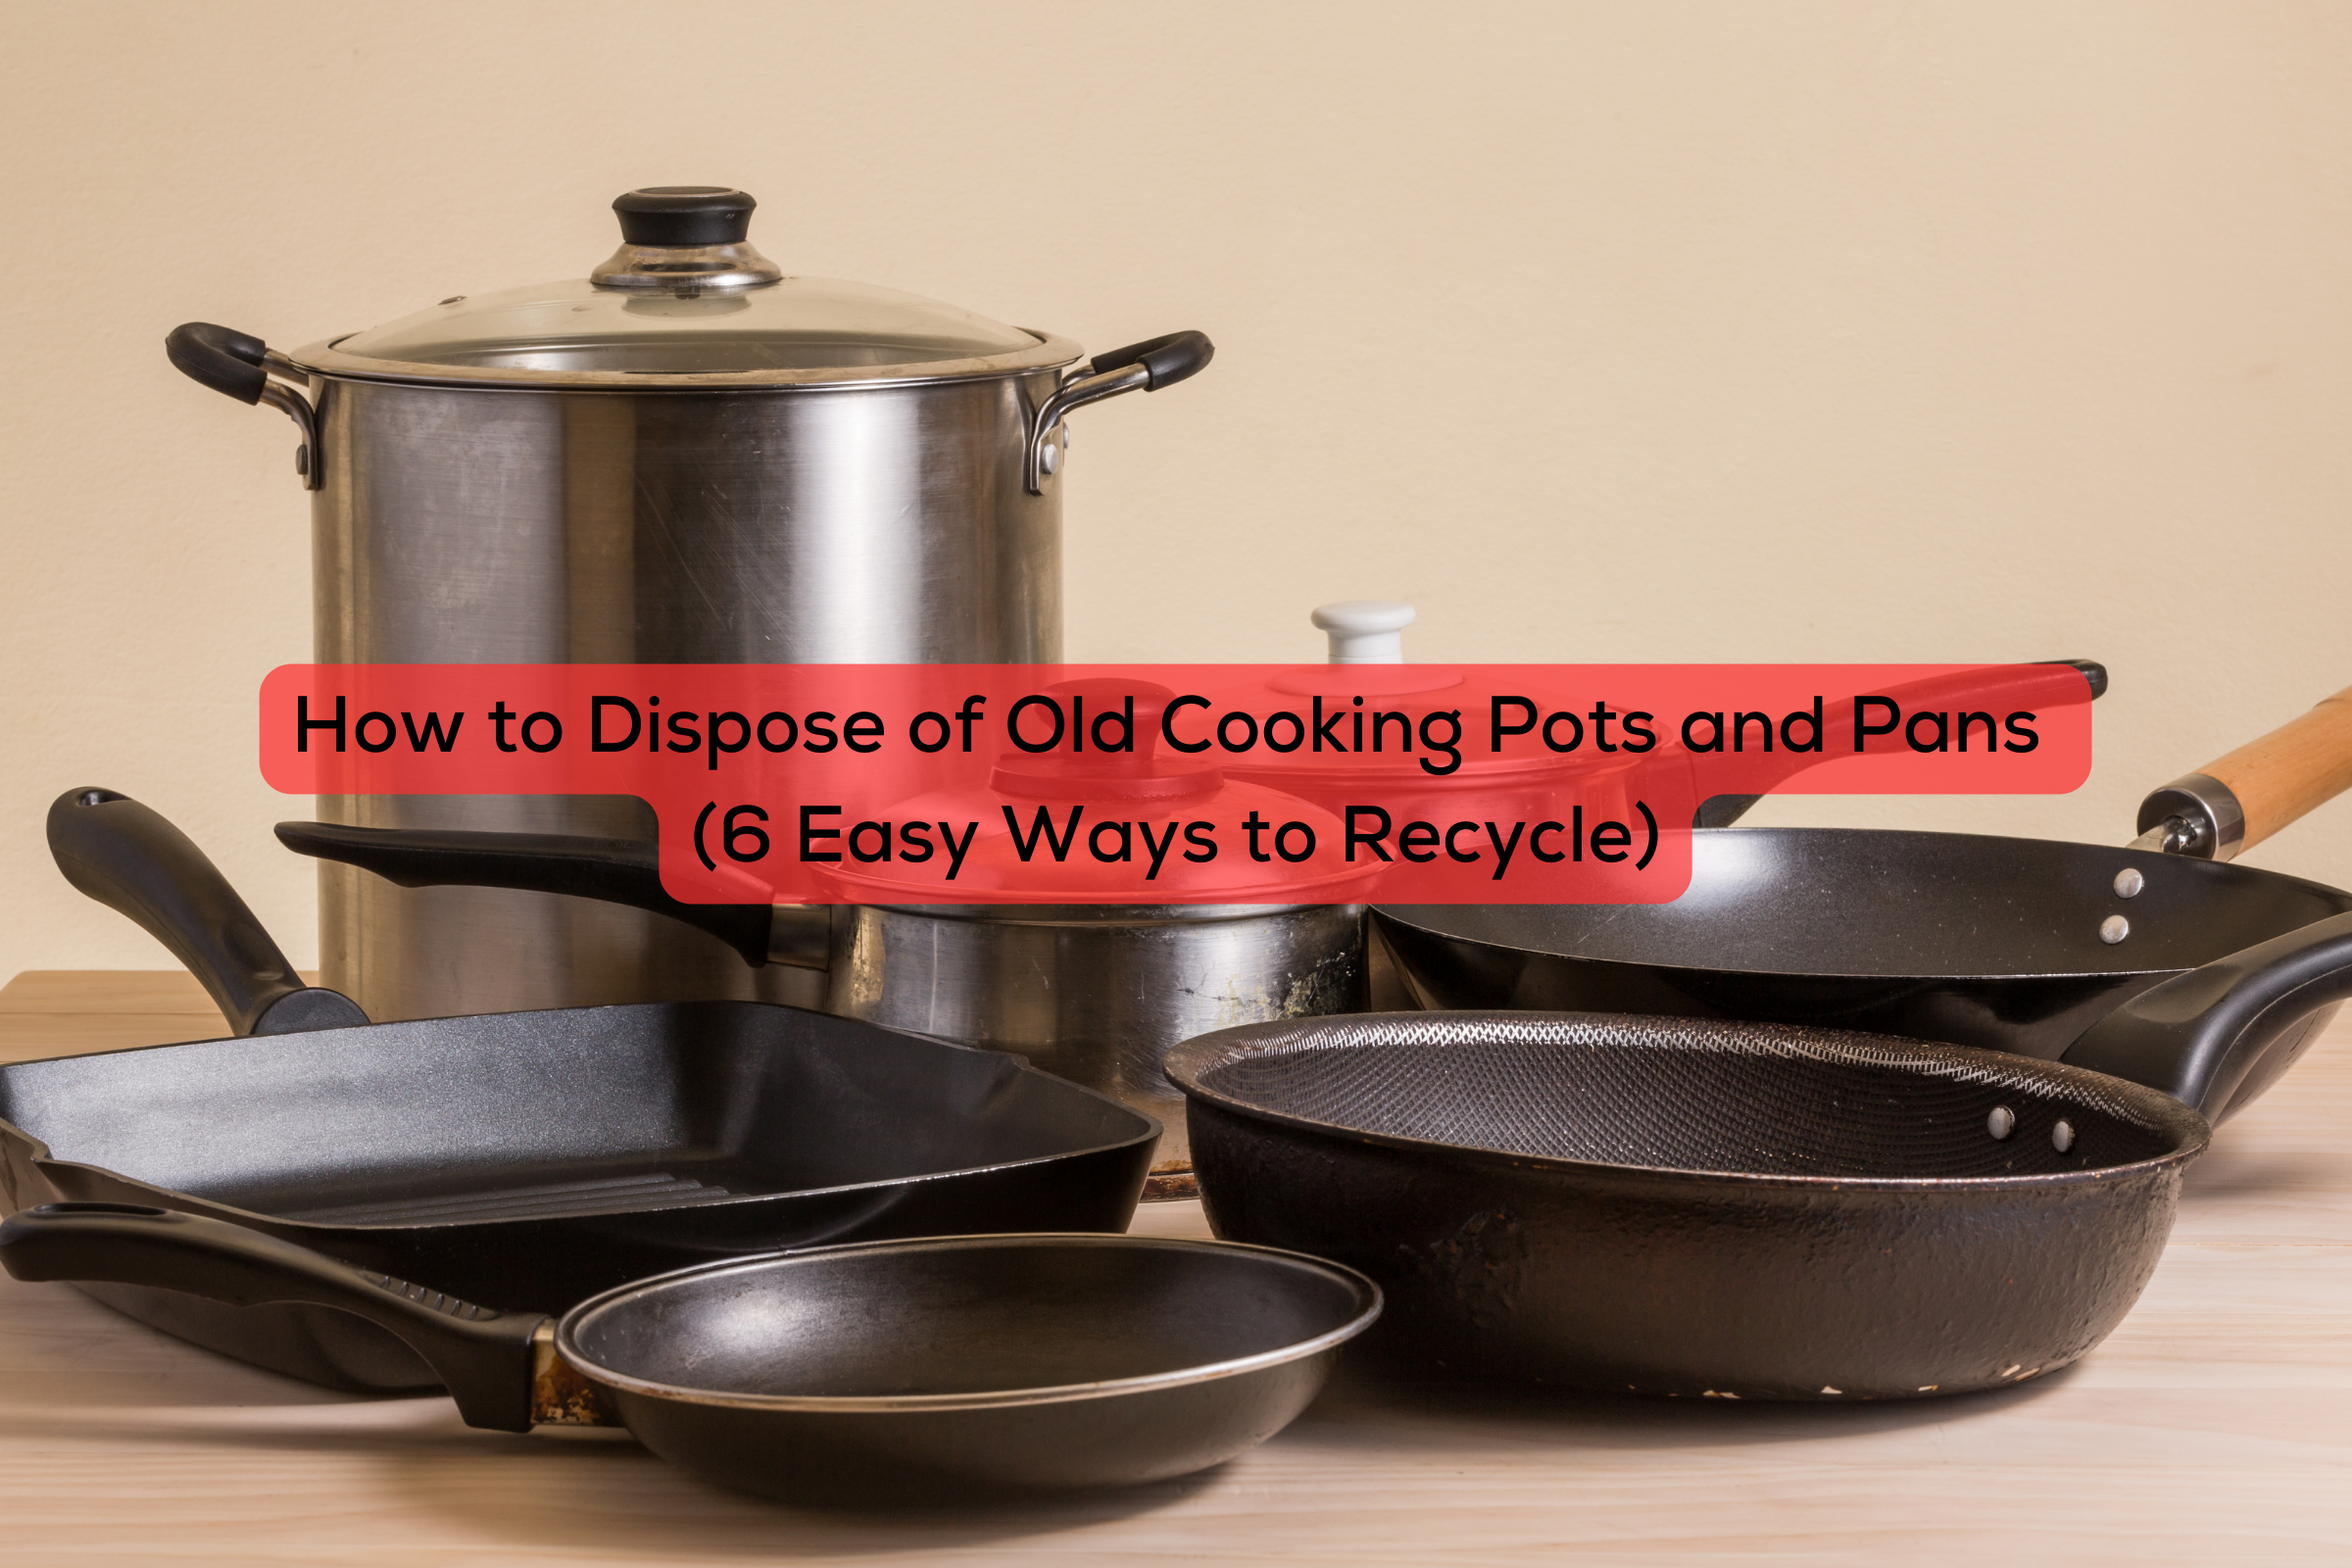 https://illjustfixitmyself.com/wp-content/uploads/2023/09/How-to-Dispose-of-Old-Cooking-Pots-and-Pans-6-easy-ways-to-recycle.png